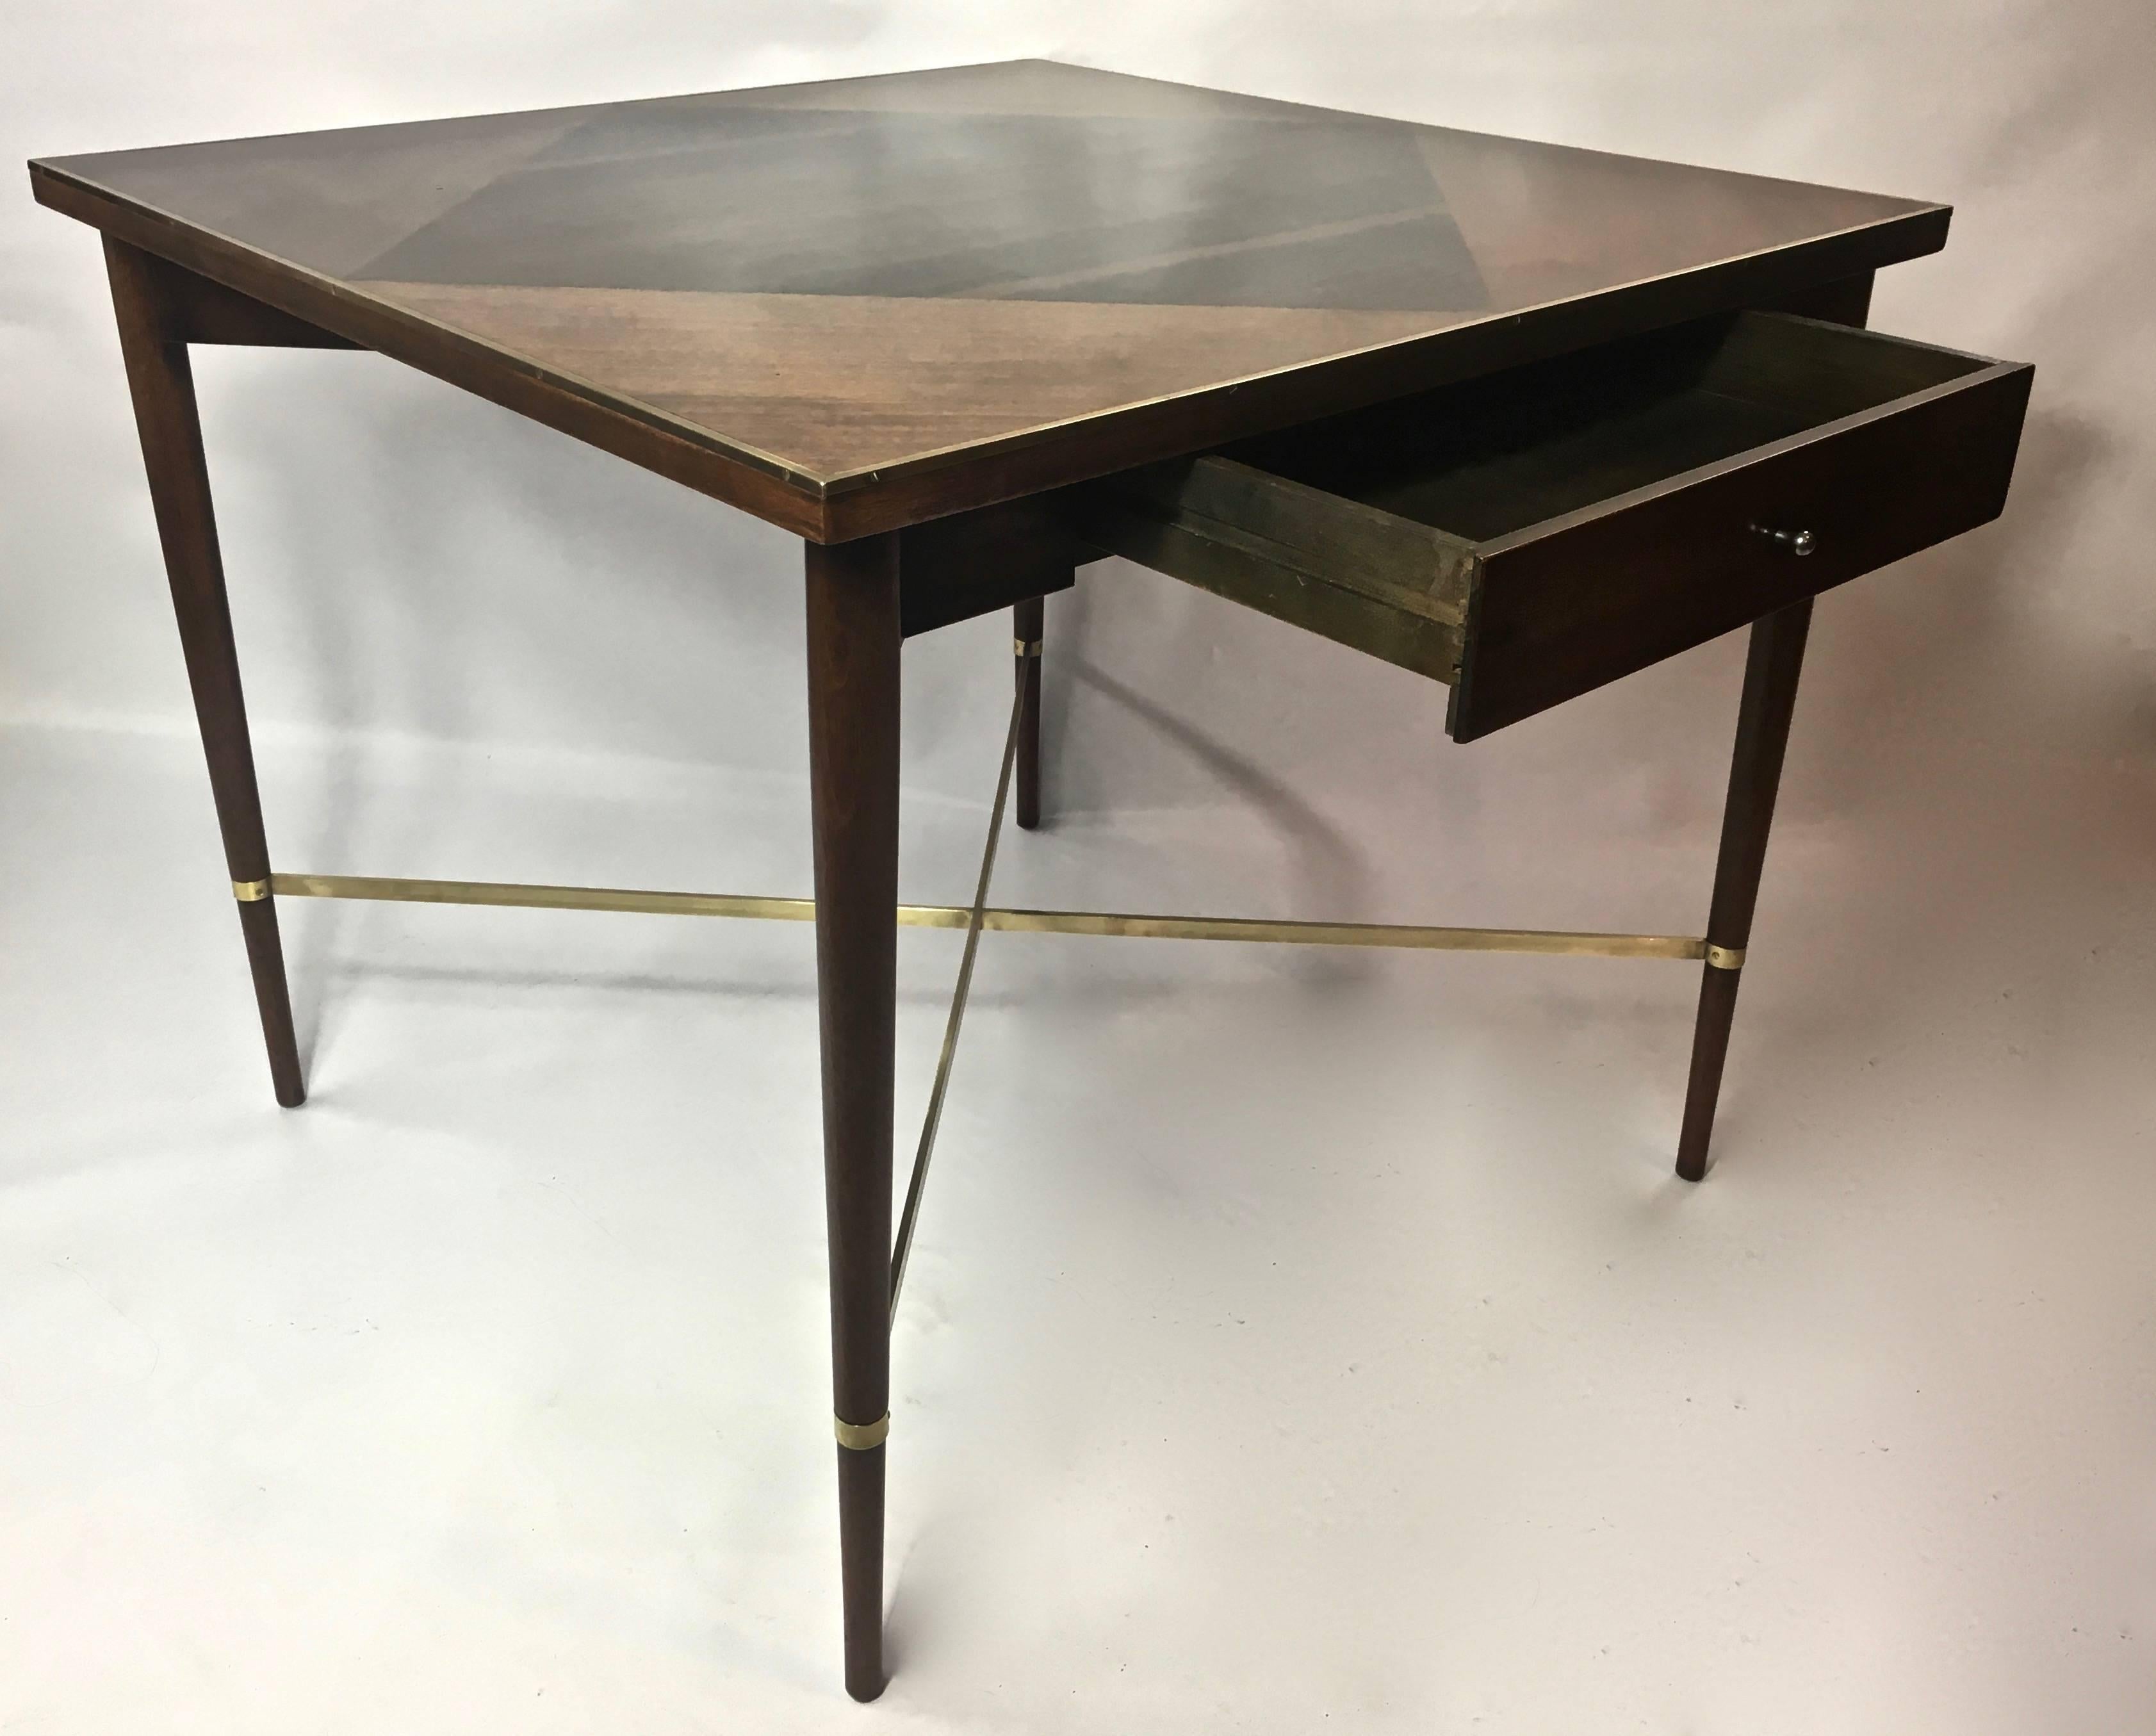 Nearly pristine condition, brought back to original luster, polished and hand finished, with contrasting inlaid zebrawood top. Polished brass X-stretcher, and brass band around the top.
Single drawer with pull. Original metal label still intact in